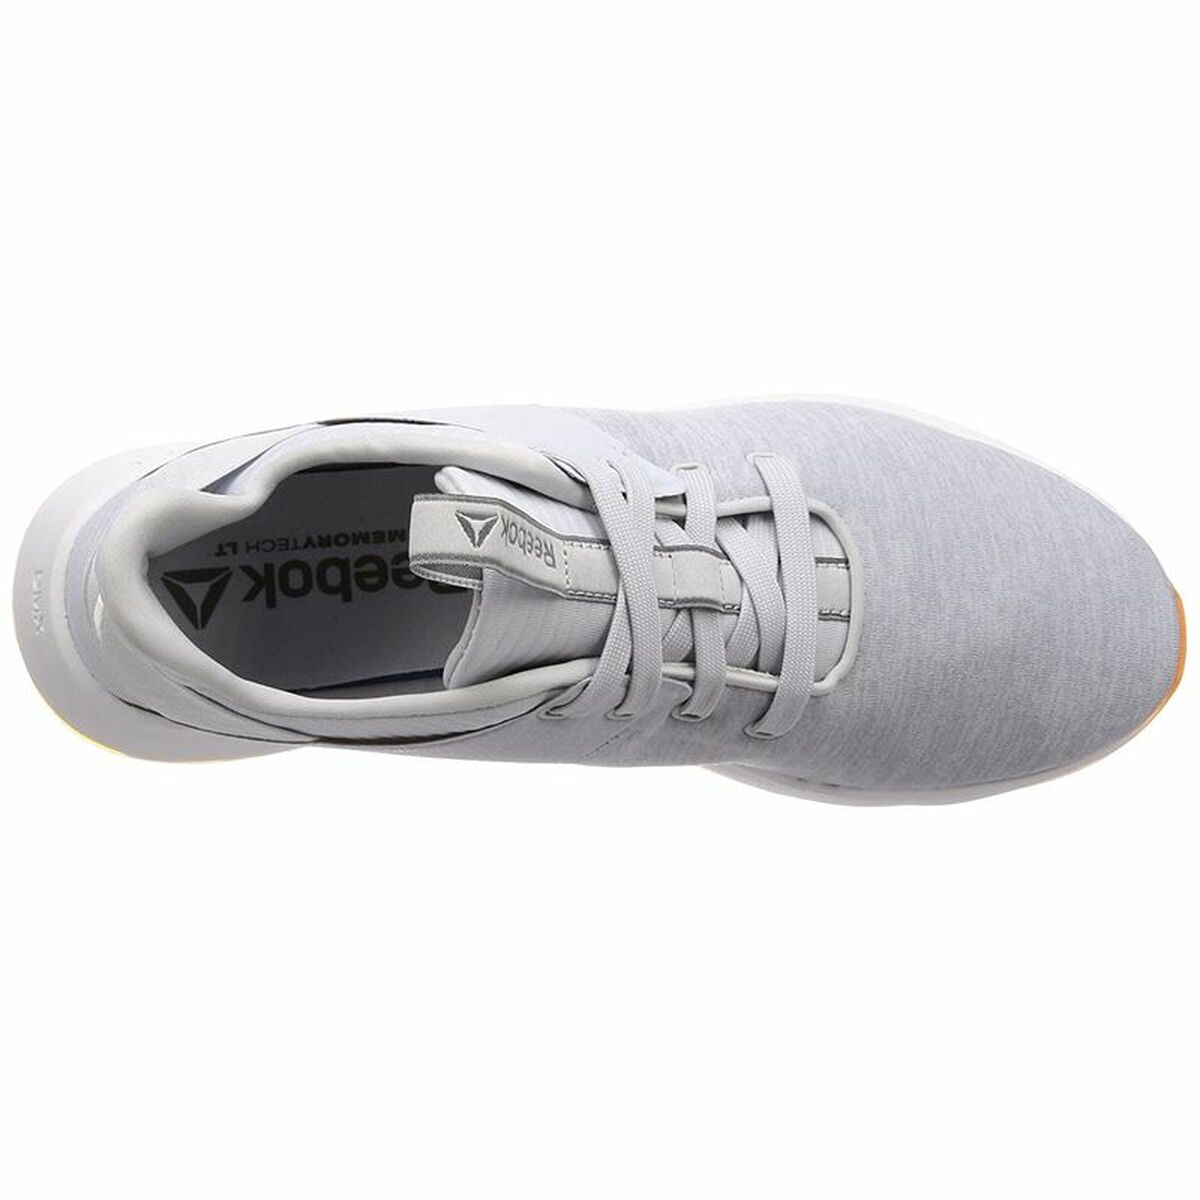 Sports Trainers for Women Reebok Ever Road DMX Light grey